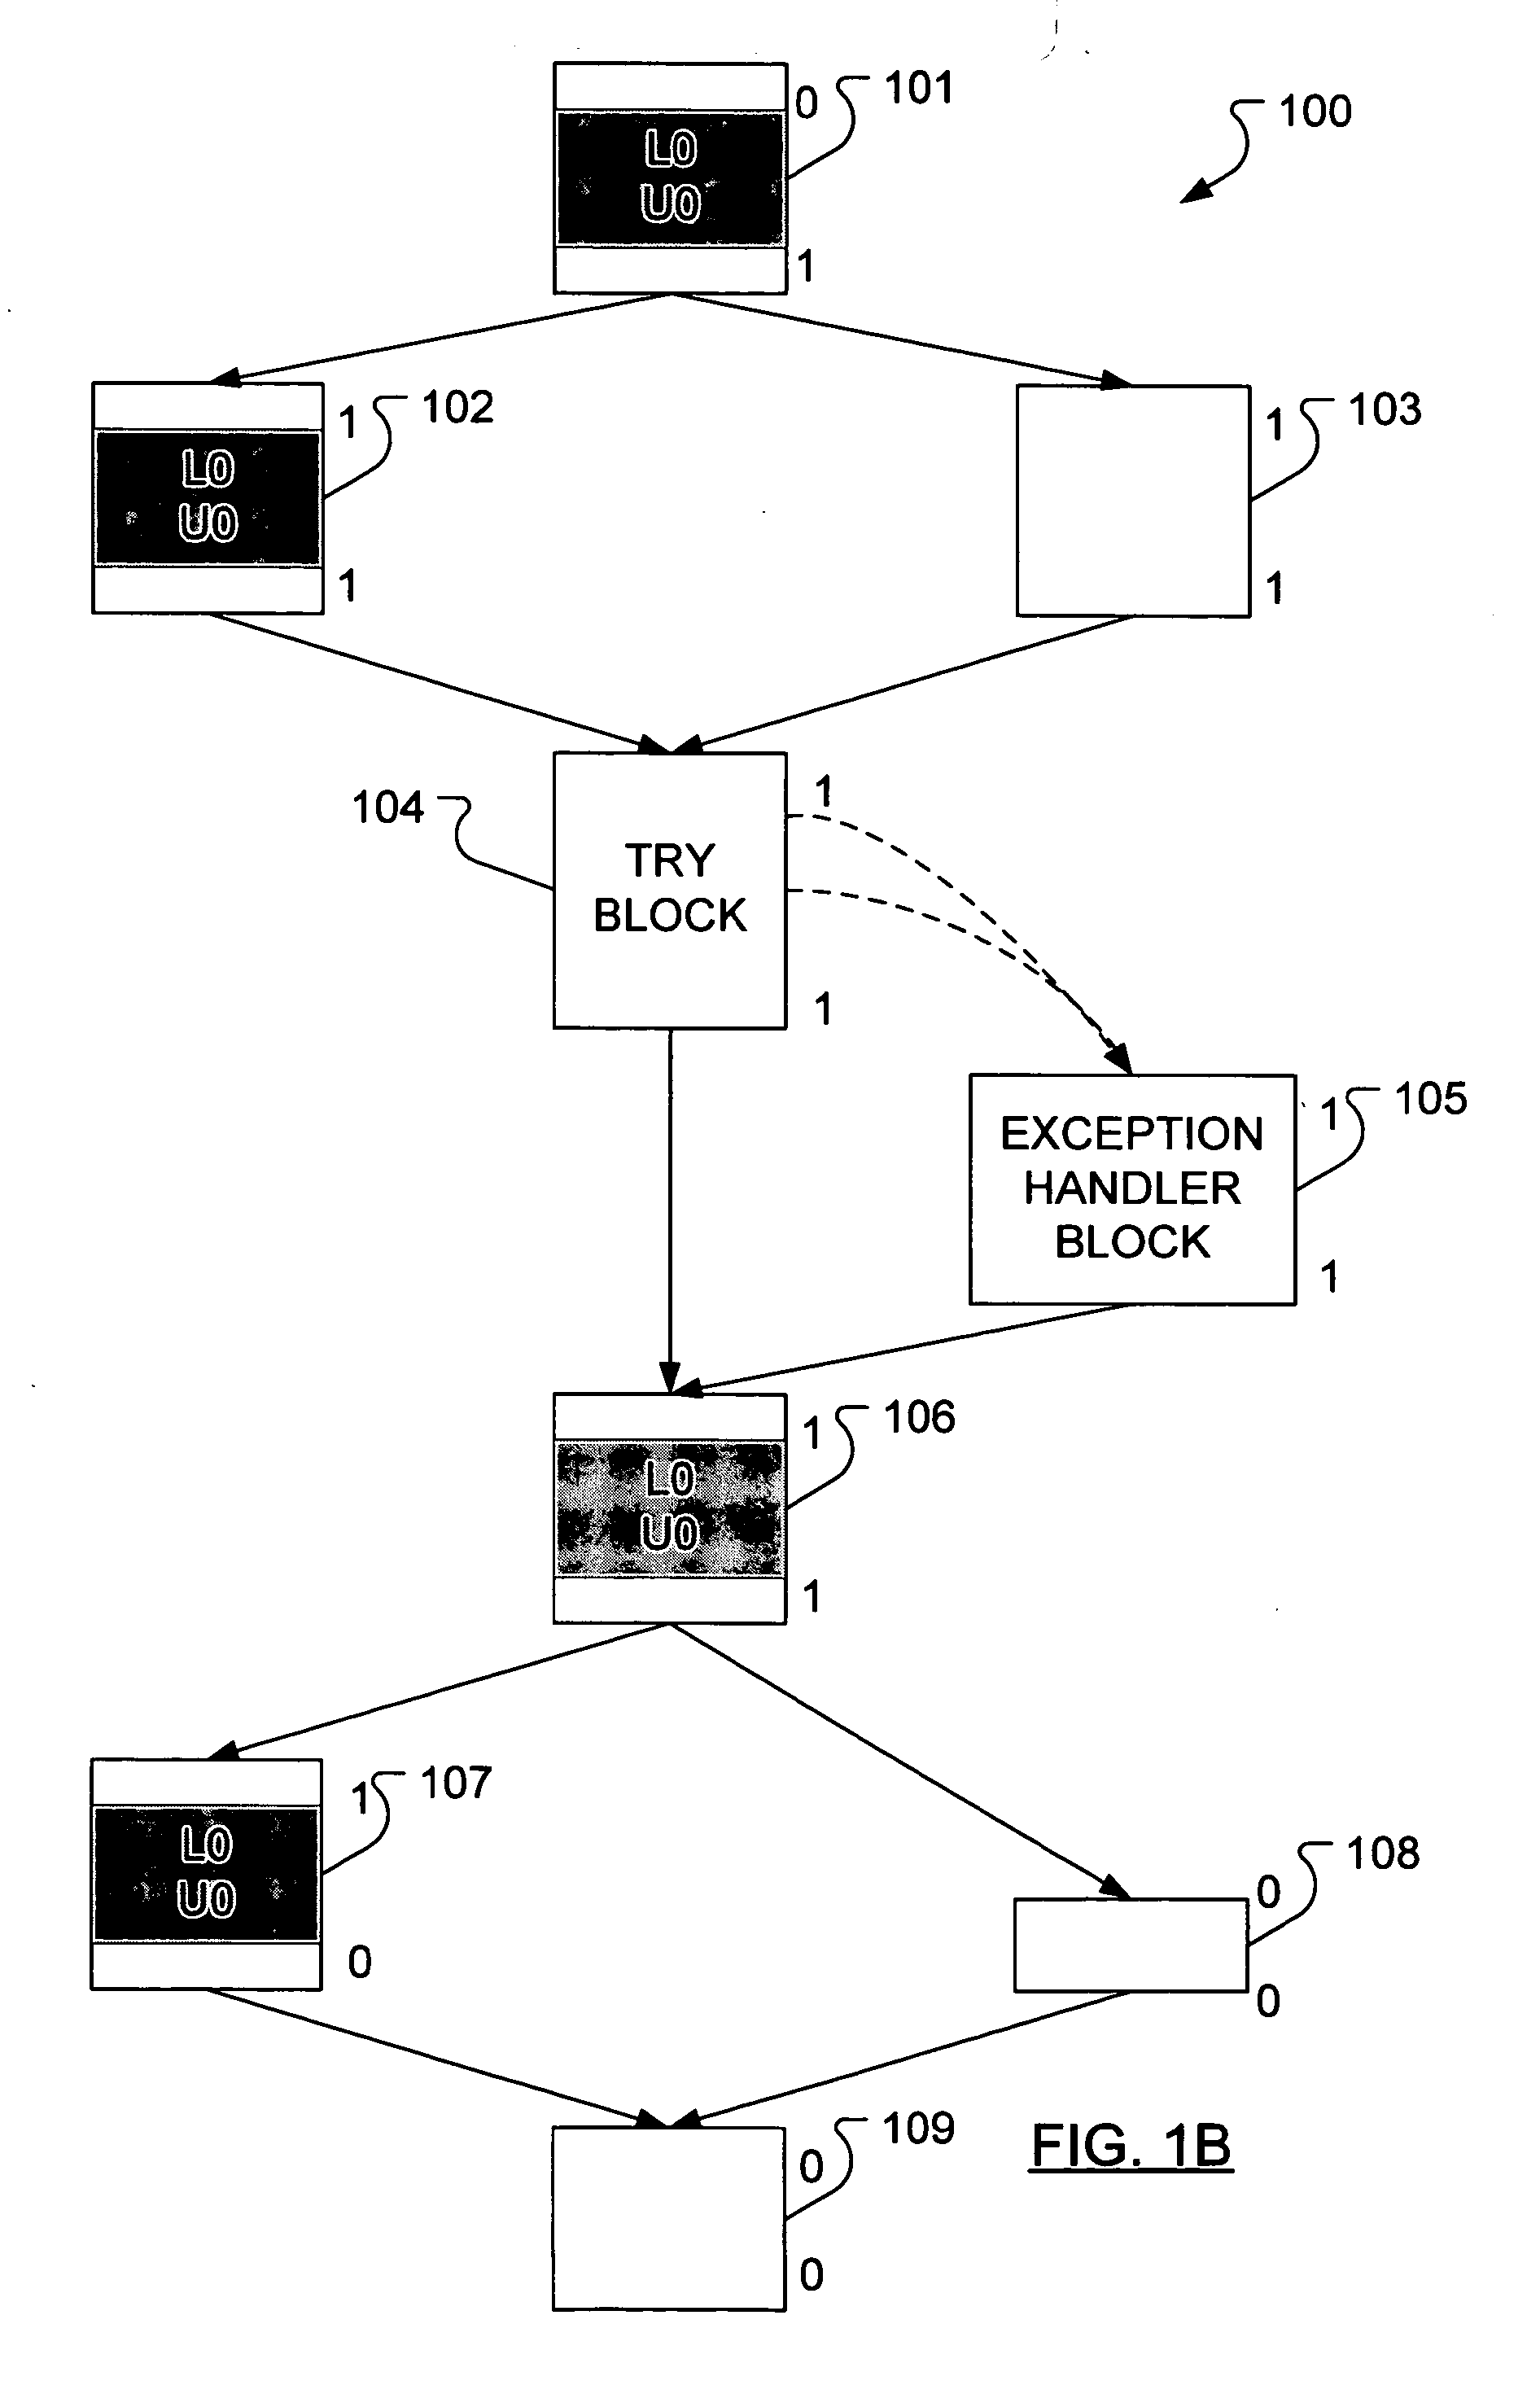 Method for jit compiler to optimize repetitive synchronization